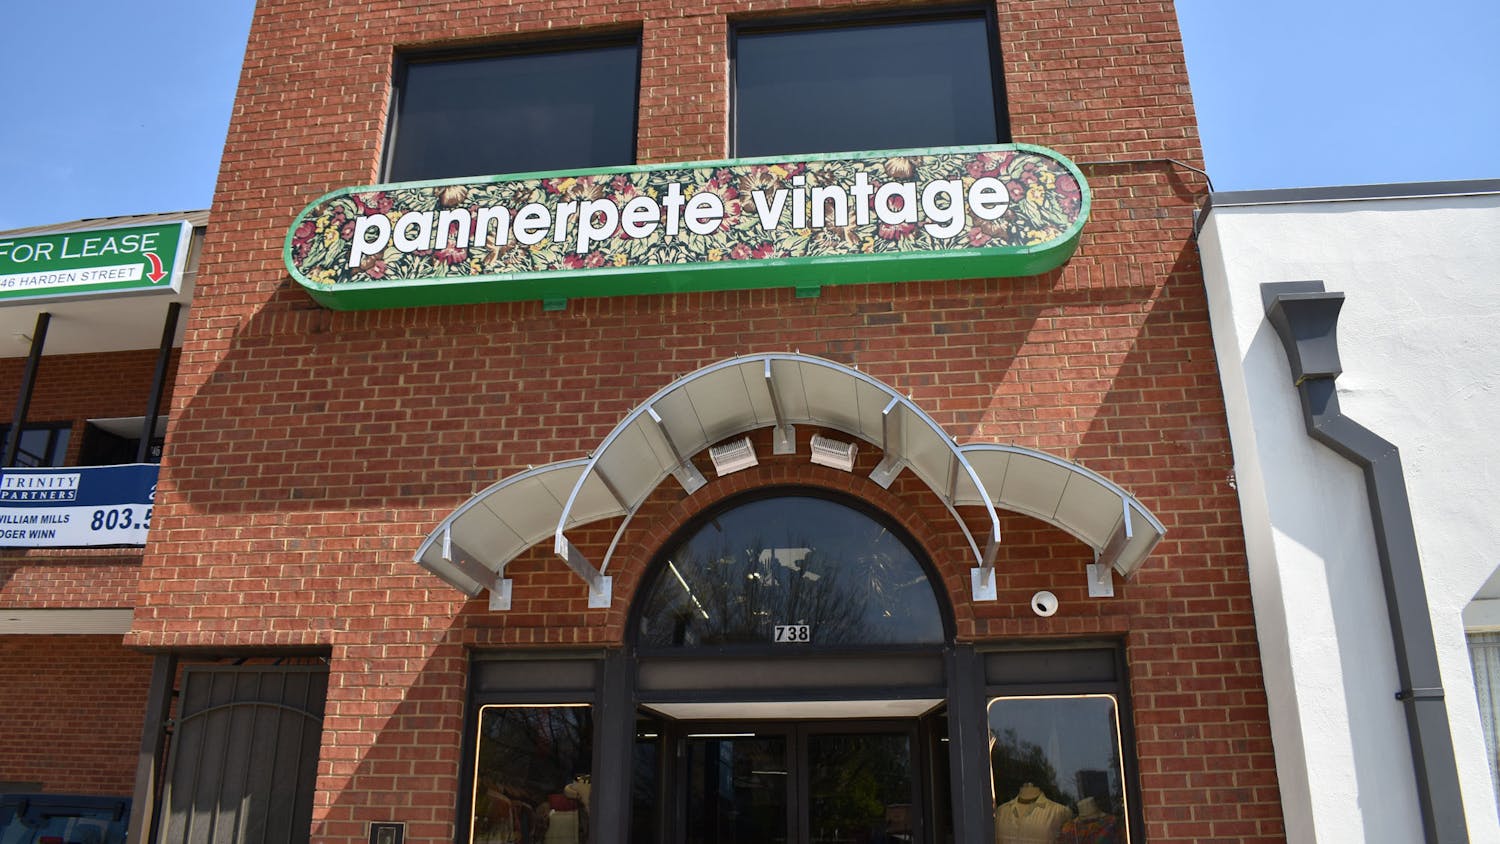 A photo of the outside of Pannerpete Vintage clothing store on Harden Street in Five Points on March 23, 2023. The store is open daily from 11 a.m. to 7 p.m., and features a variety of vintage clothing and jewelry.